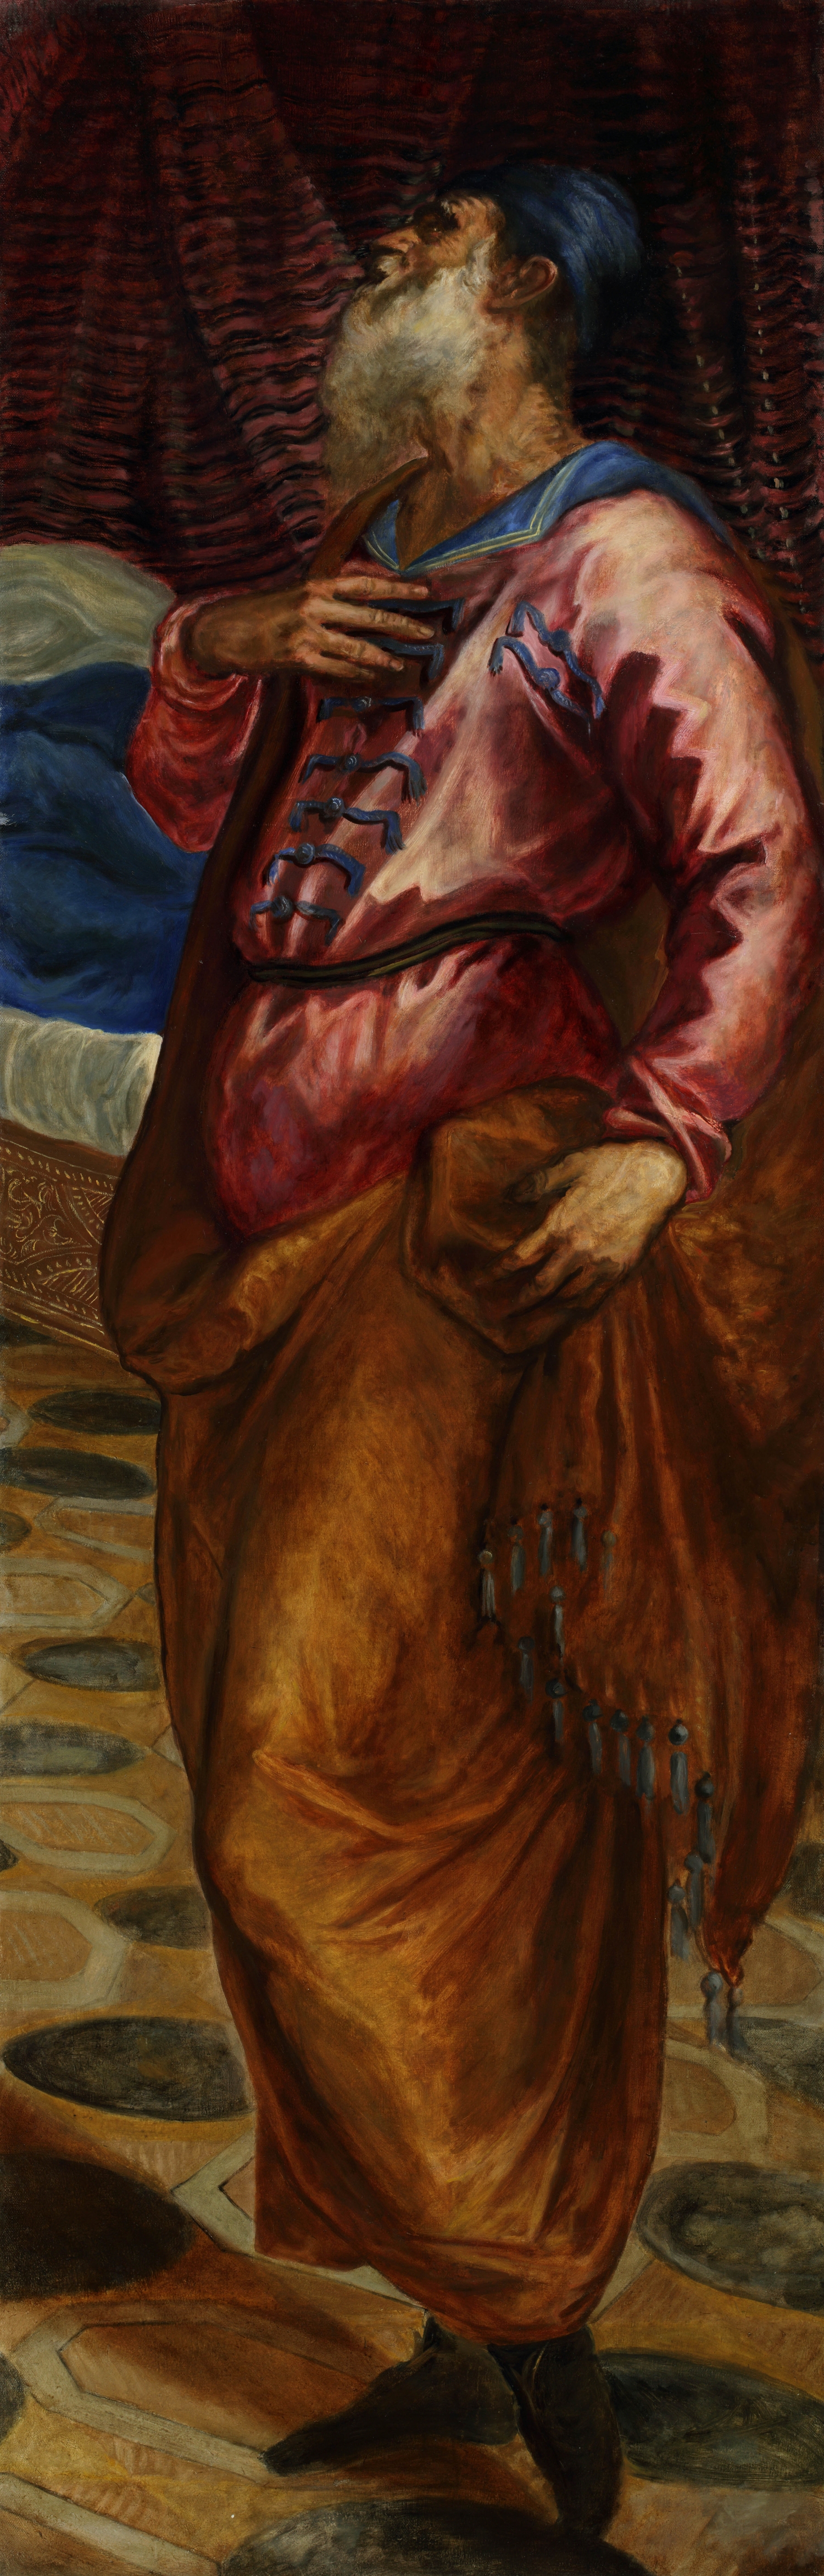  ZACHARIA   Copy of fragment from The Birth of St John the Baptist by Tintoretto    2016    Oil on canvas    170 x 55 cm  